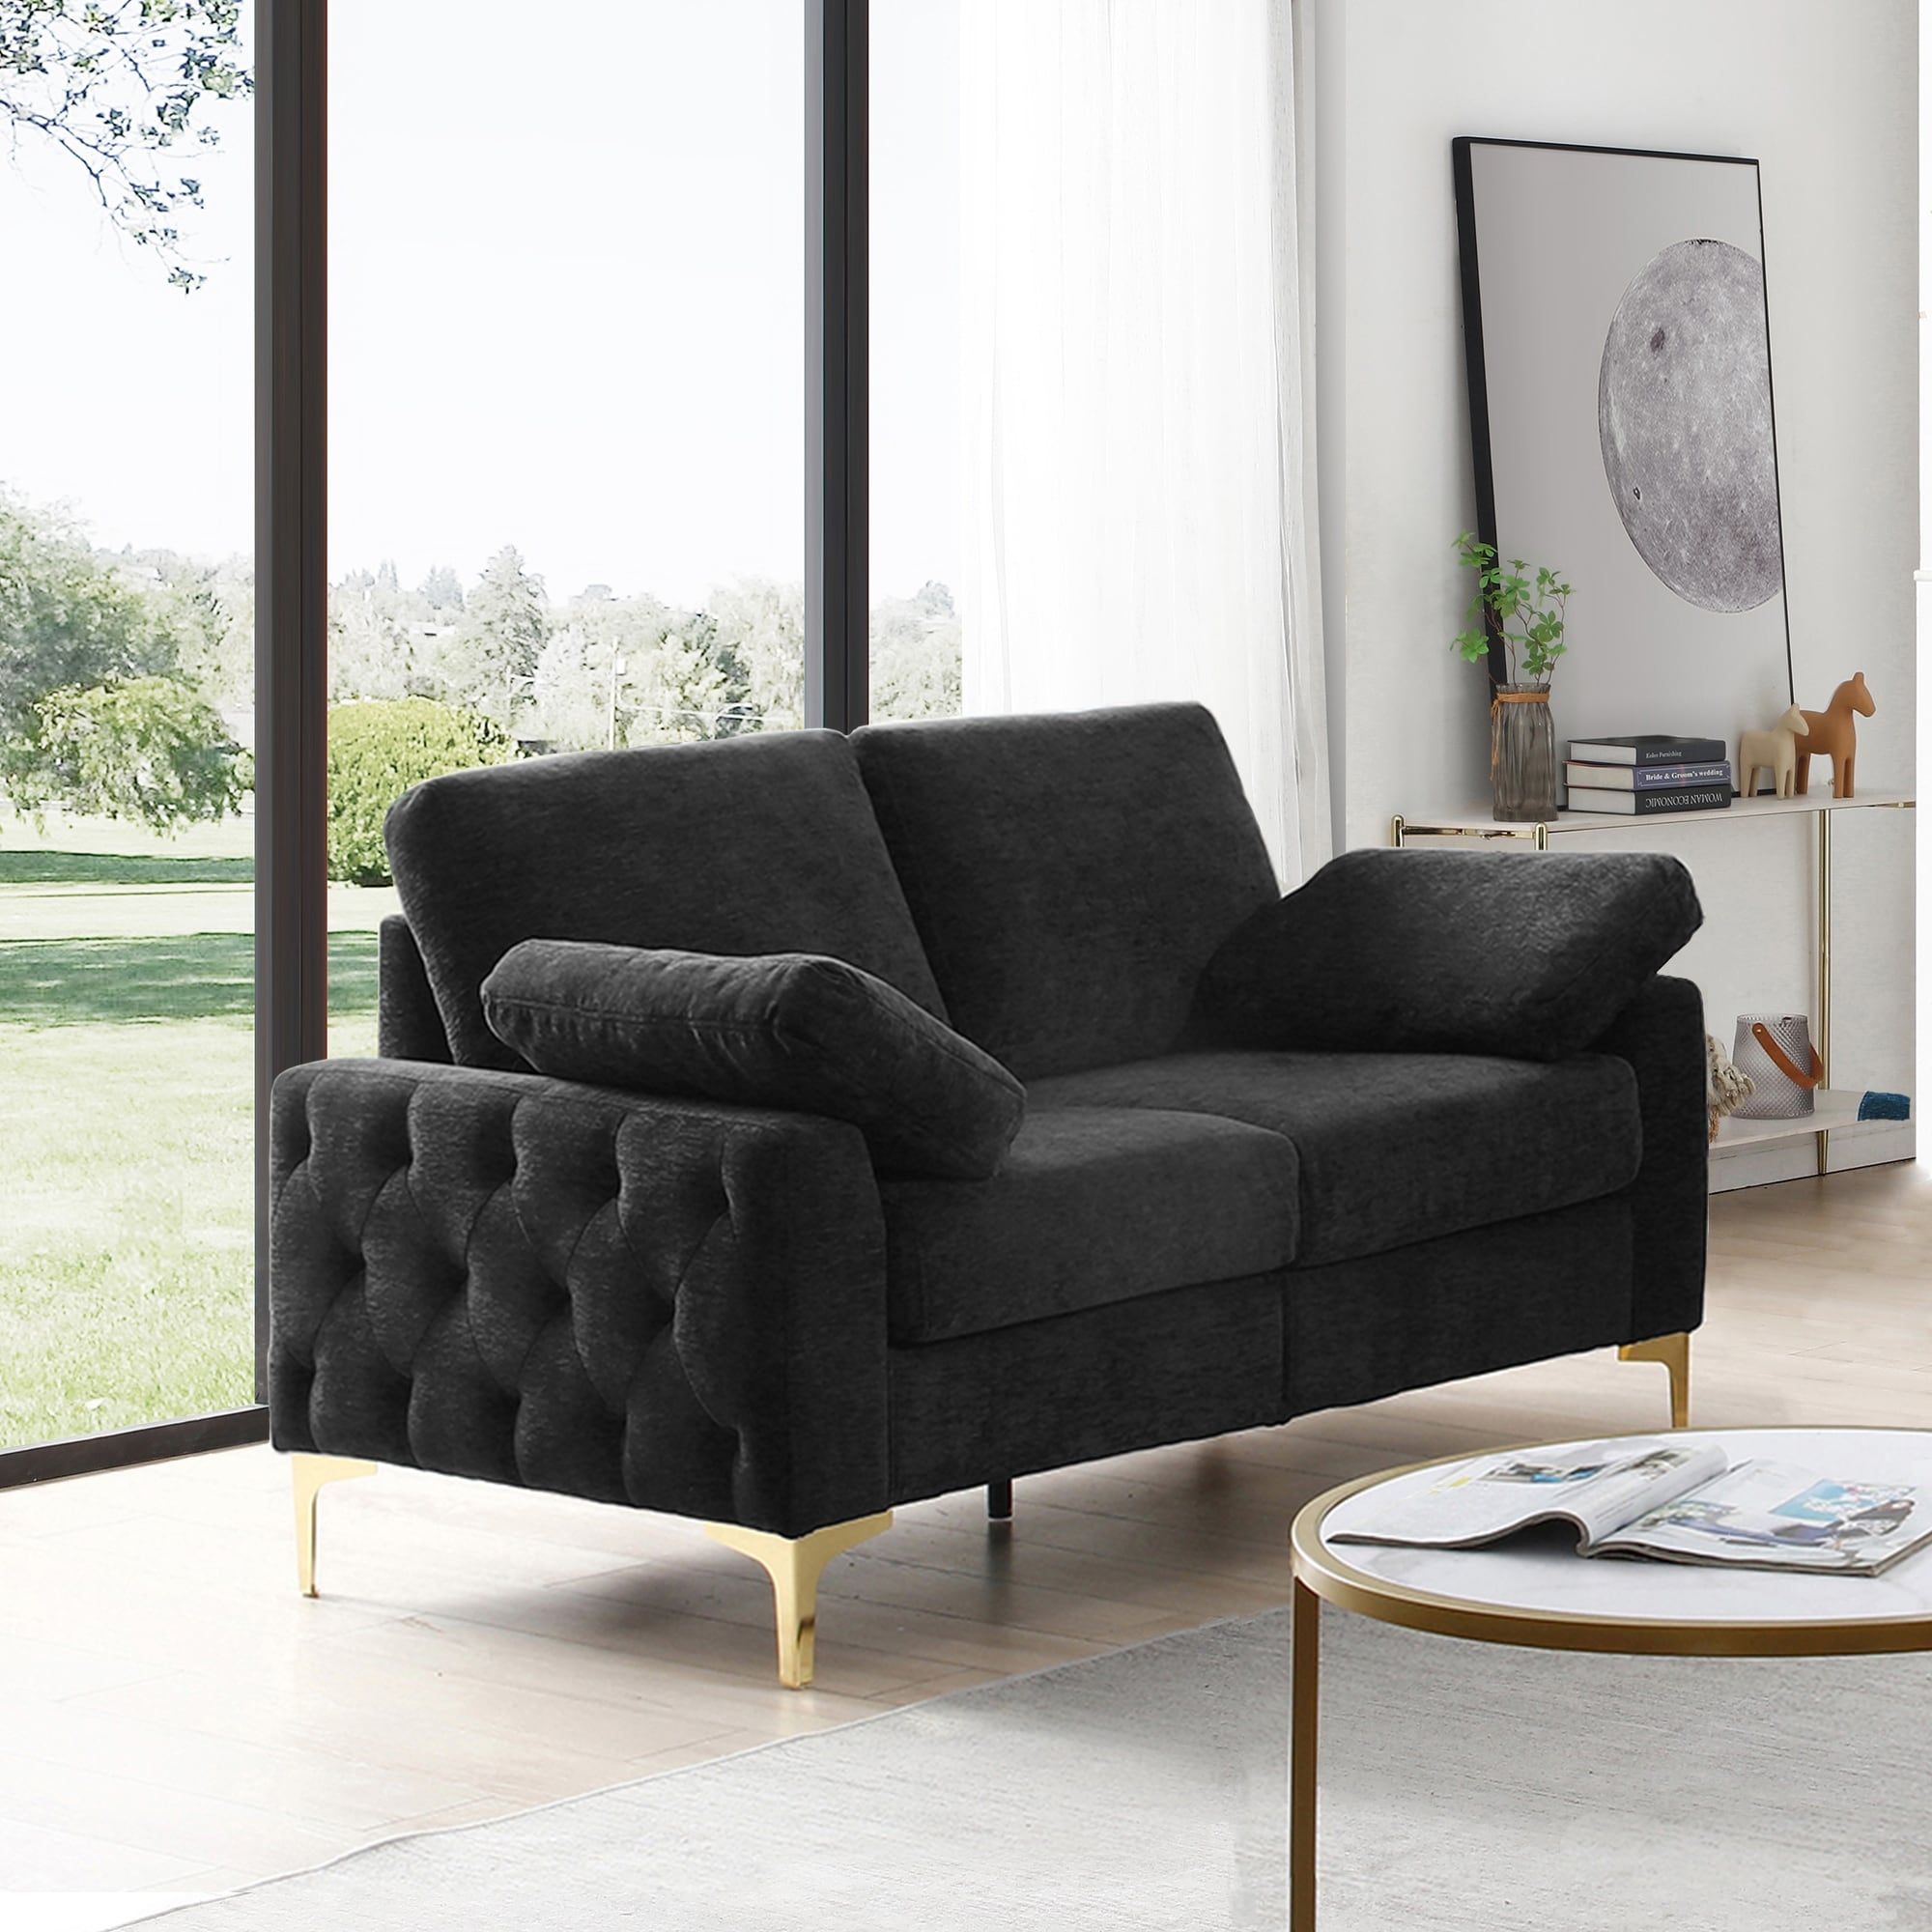 Tufted 2 Seater Couch Chenille Fabric Upholstered Loveseat Sofas Removable  Cushions Sofa With 2 Arm Pillows And Metal Legs – Bed Bath & Beyond –  38046946 With Regard To 2 Seater Black Velvet Sofa Beds (View 3 of 15)